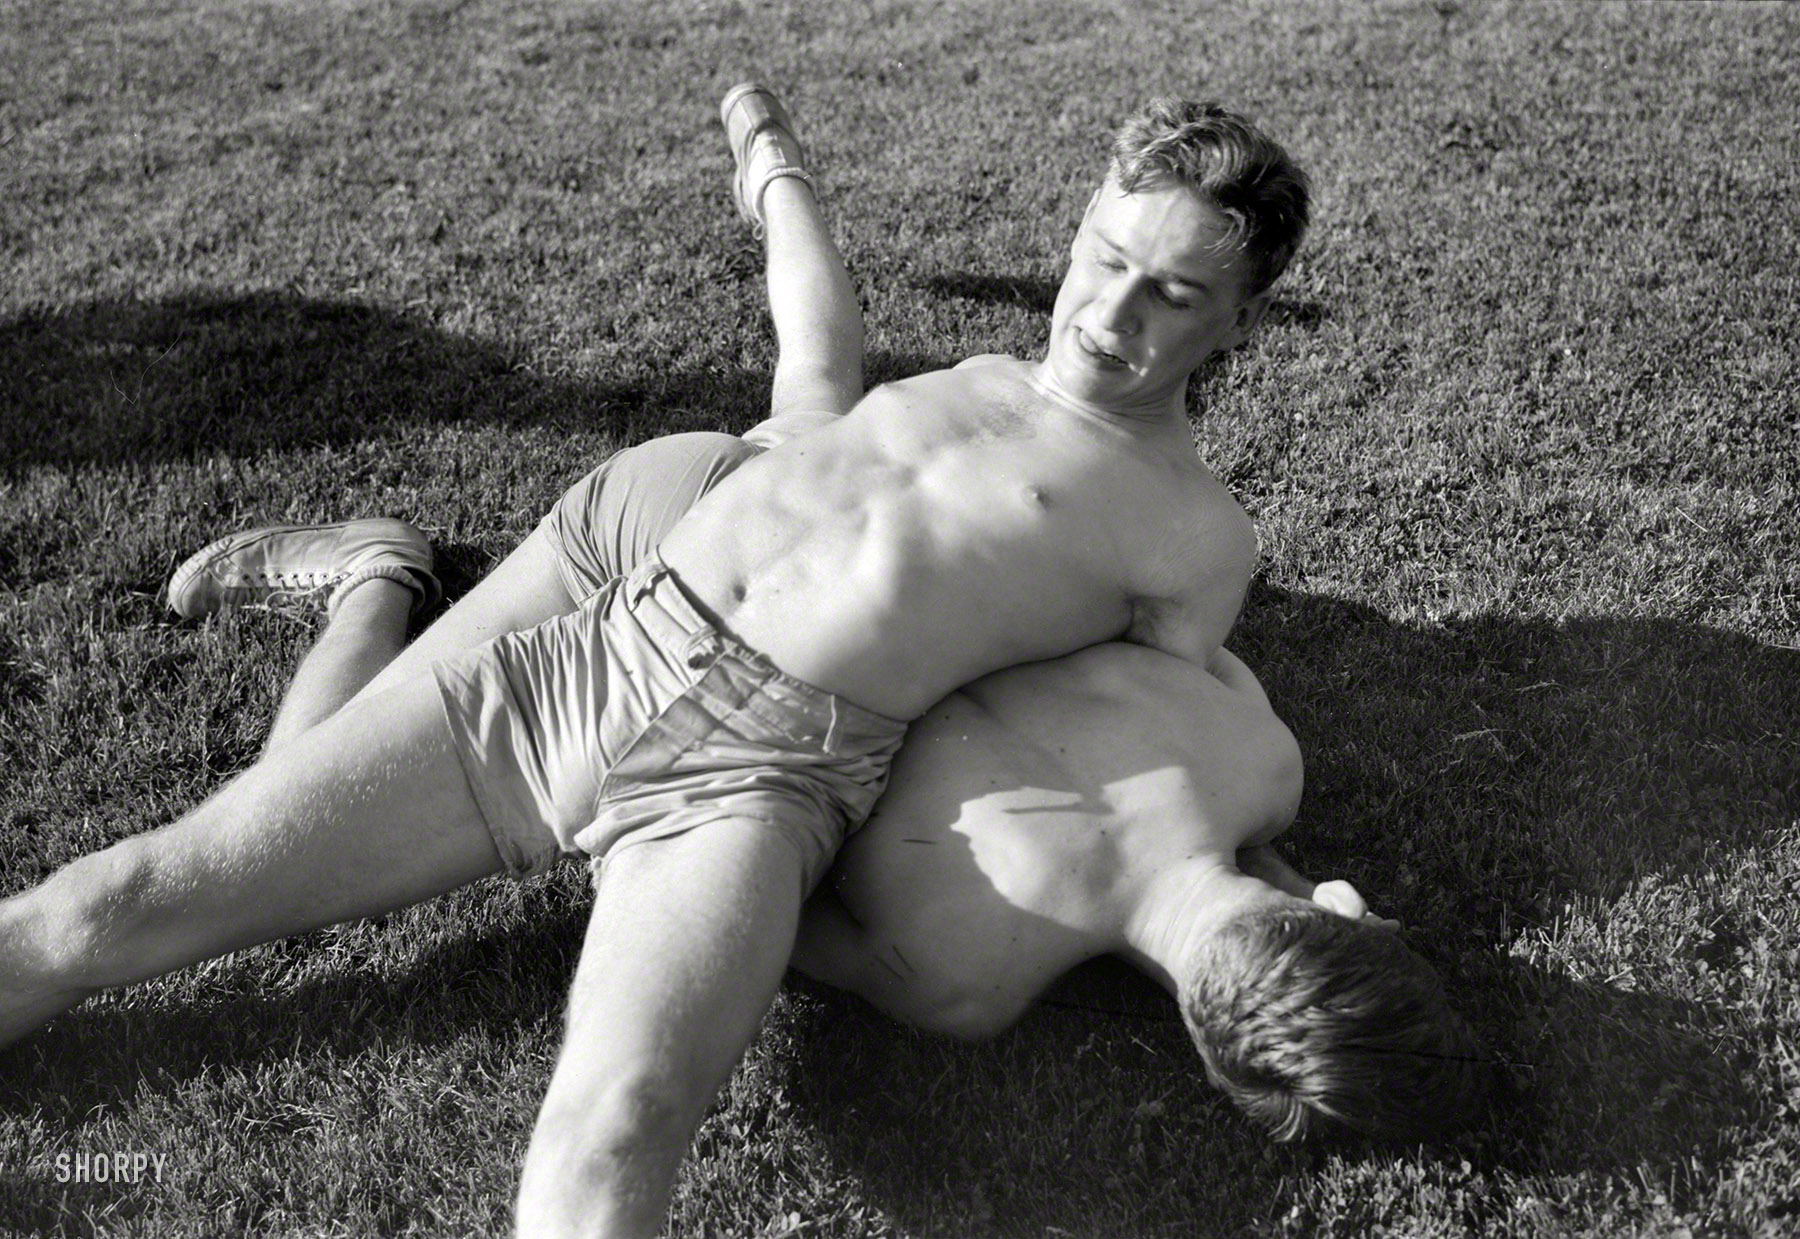 July 1942. "Wrestling at U.S. Naval Academy." Our second look at the manly midshipmen of Annapolis as snapped by "Lieutenant Whitman." View full size.